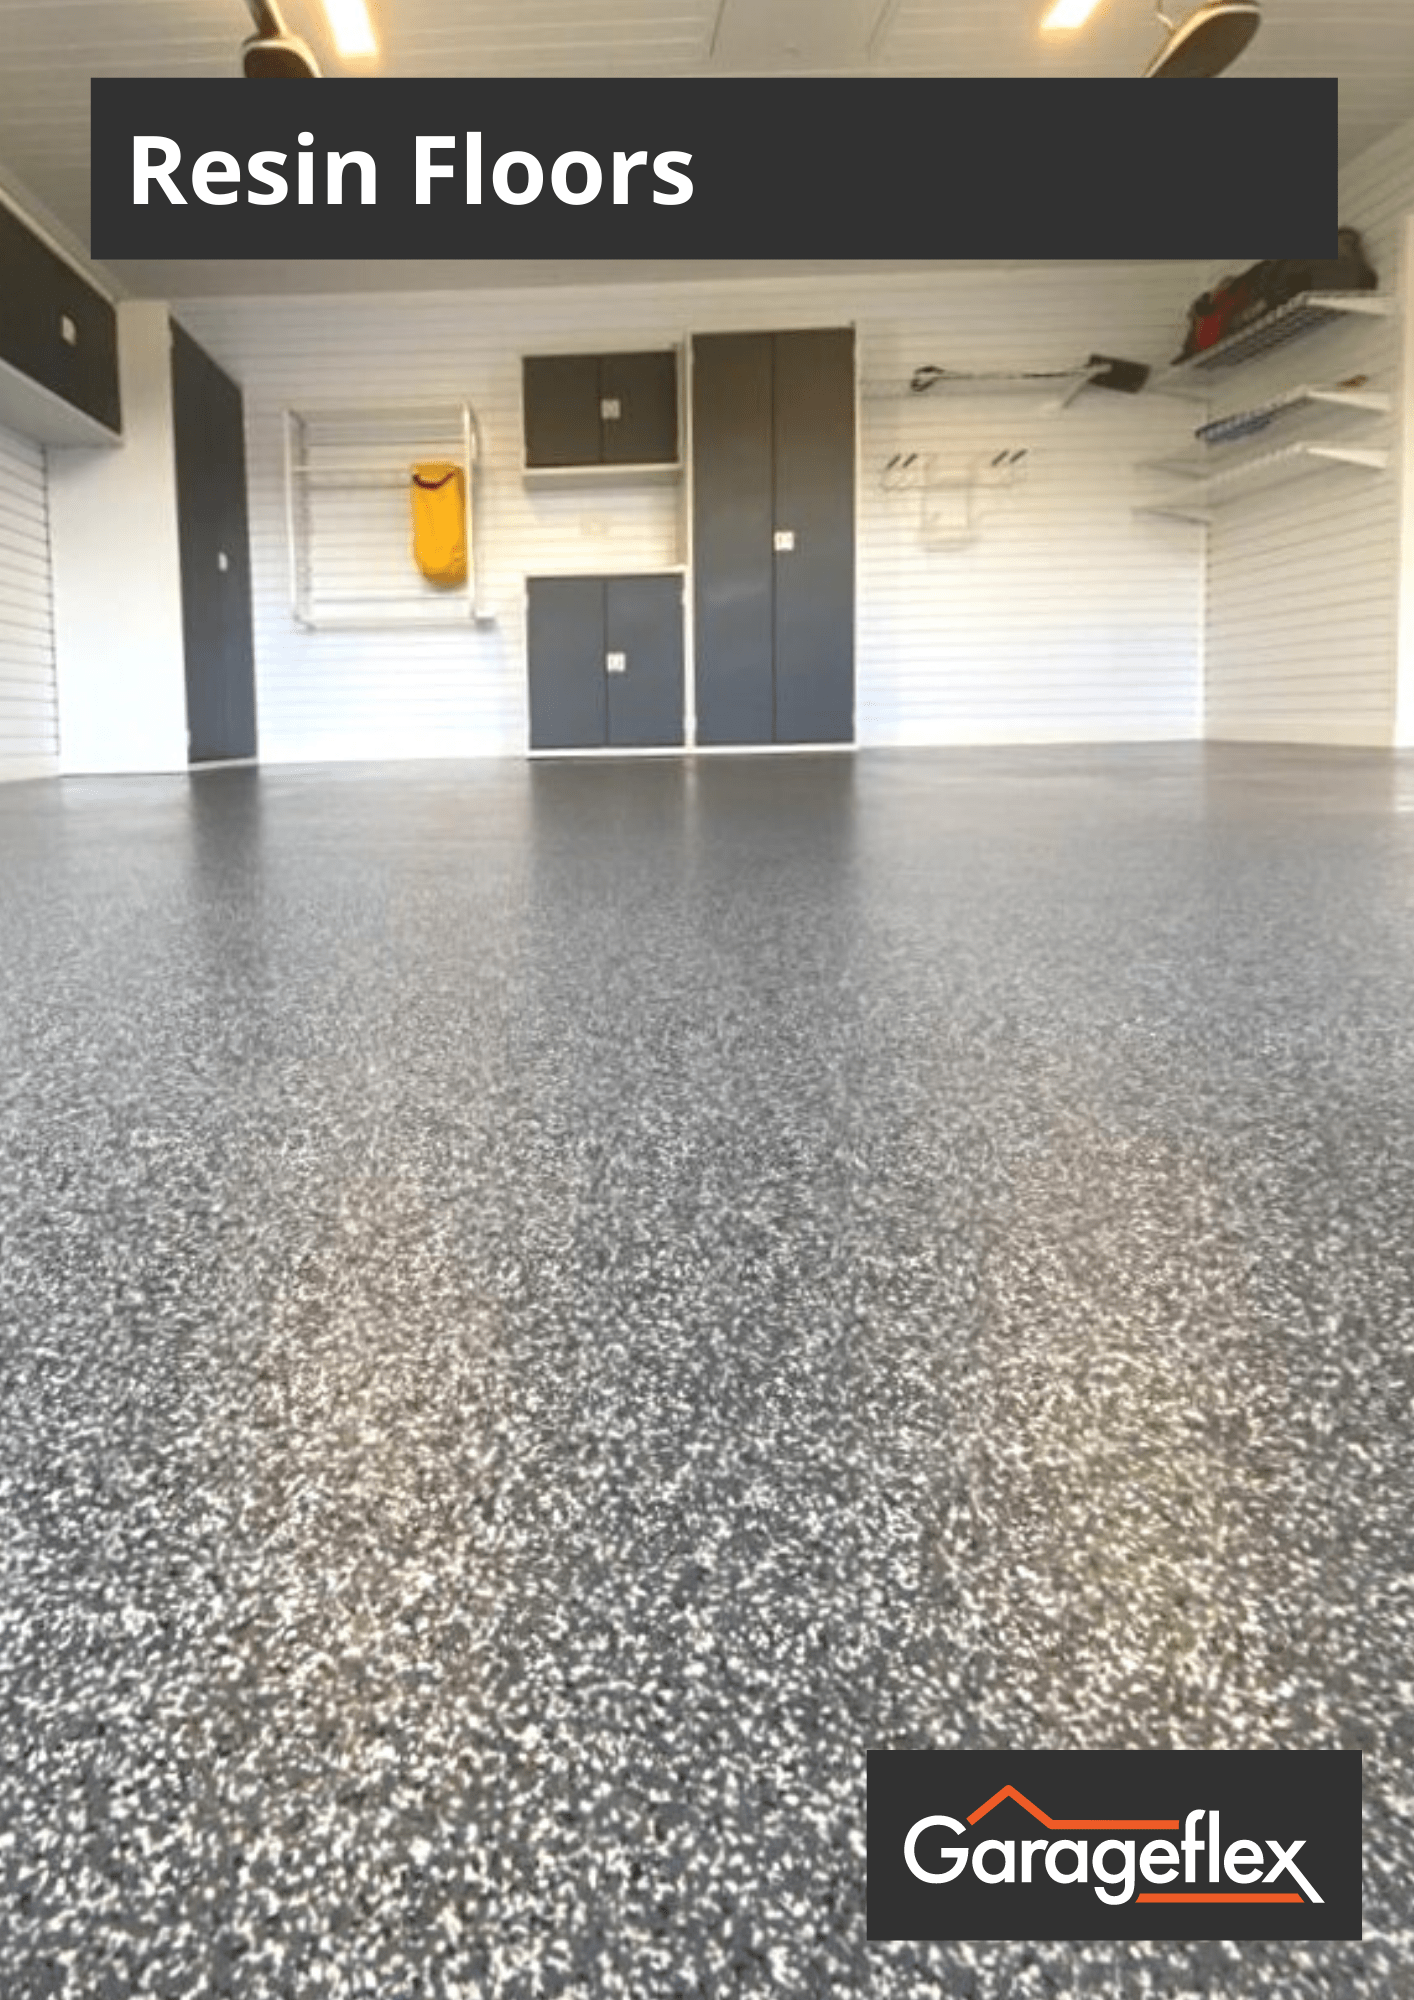 Be inspired to lay a Resin Floor in your garage